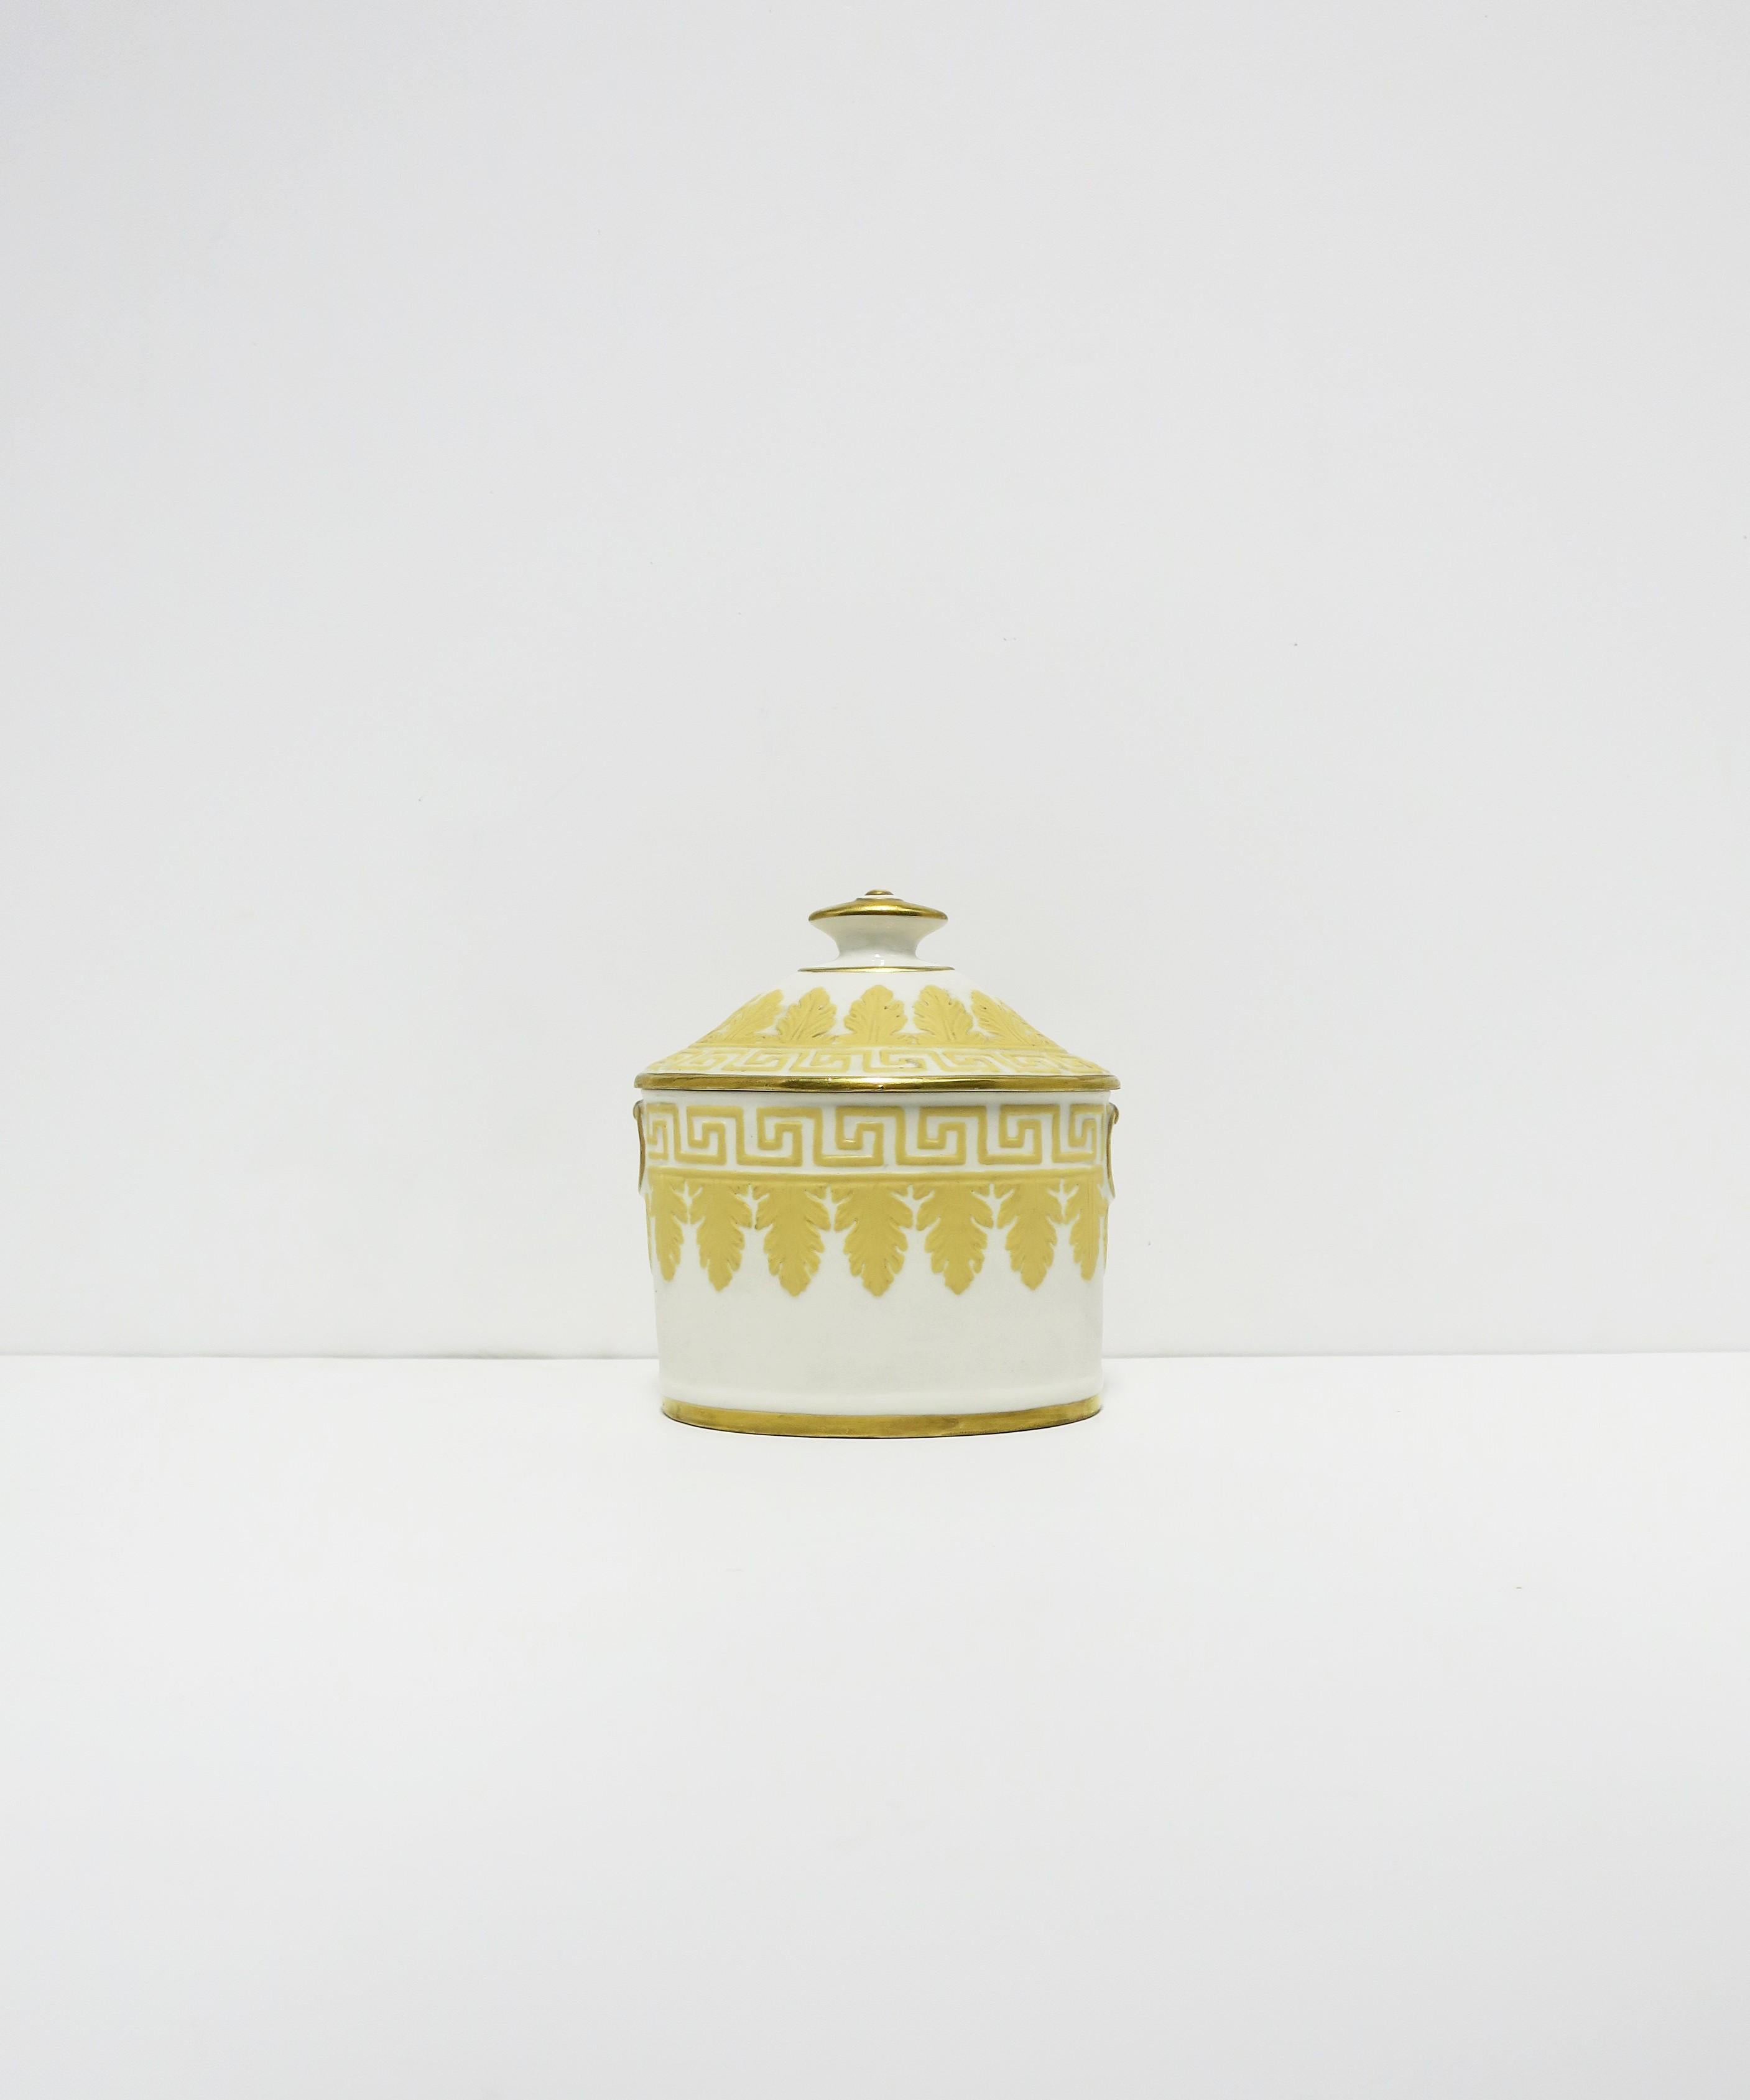 A beautiful English jasperware box with acanthus leaf and Greek-Key design, circa late-19th century, England. Piece is attributed to Wedgwood and designer, John Flaxman. Box is oval, matte (unglazed), with a yellow raised frieze of Greek-Key and